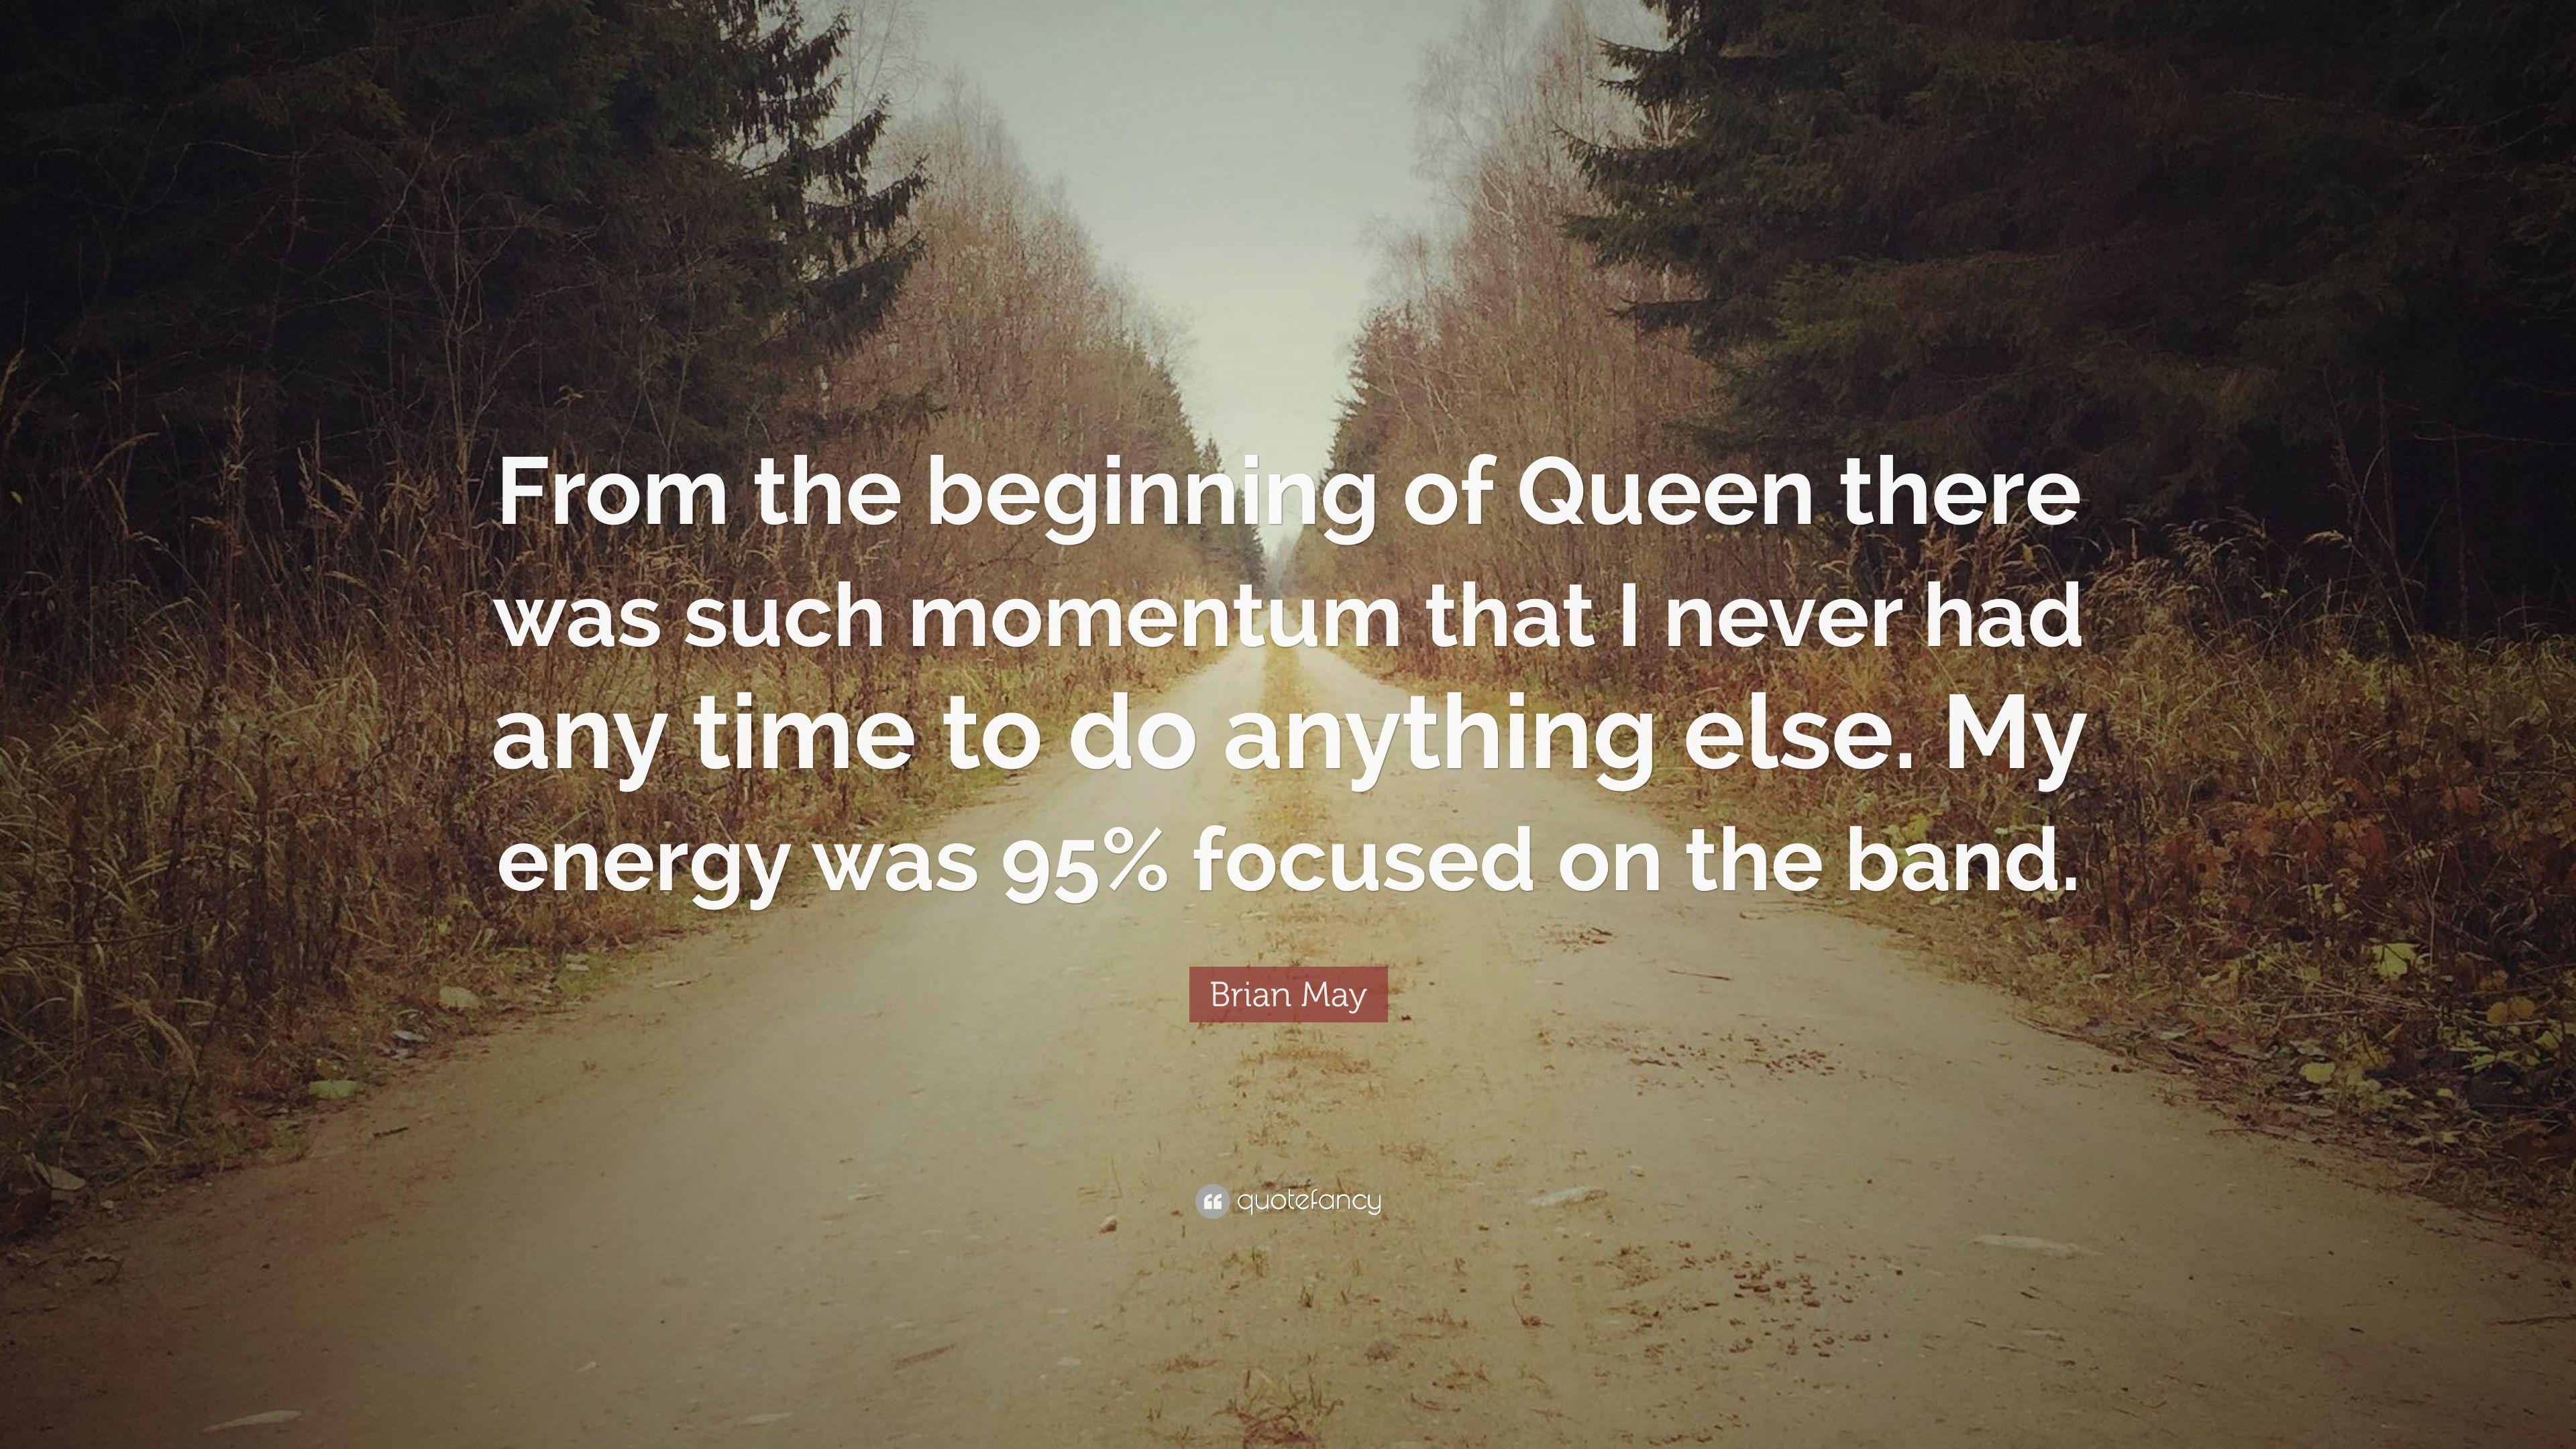 Brian May Quote: “From the beginning of Queen there was such